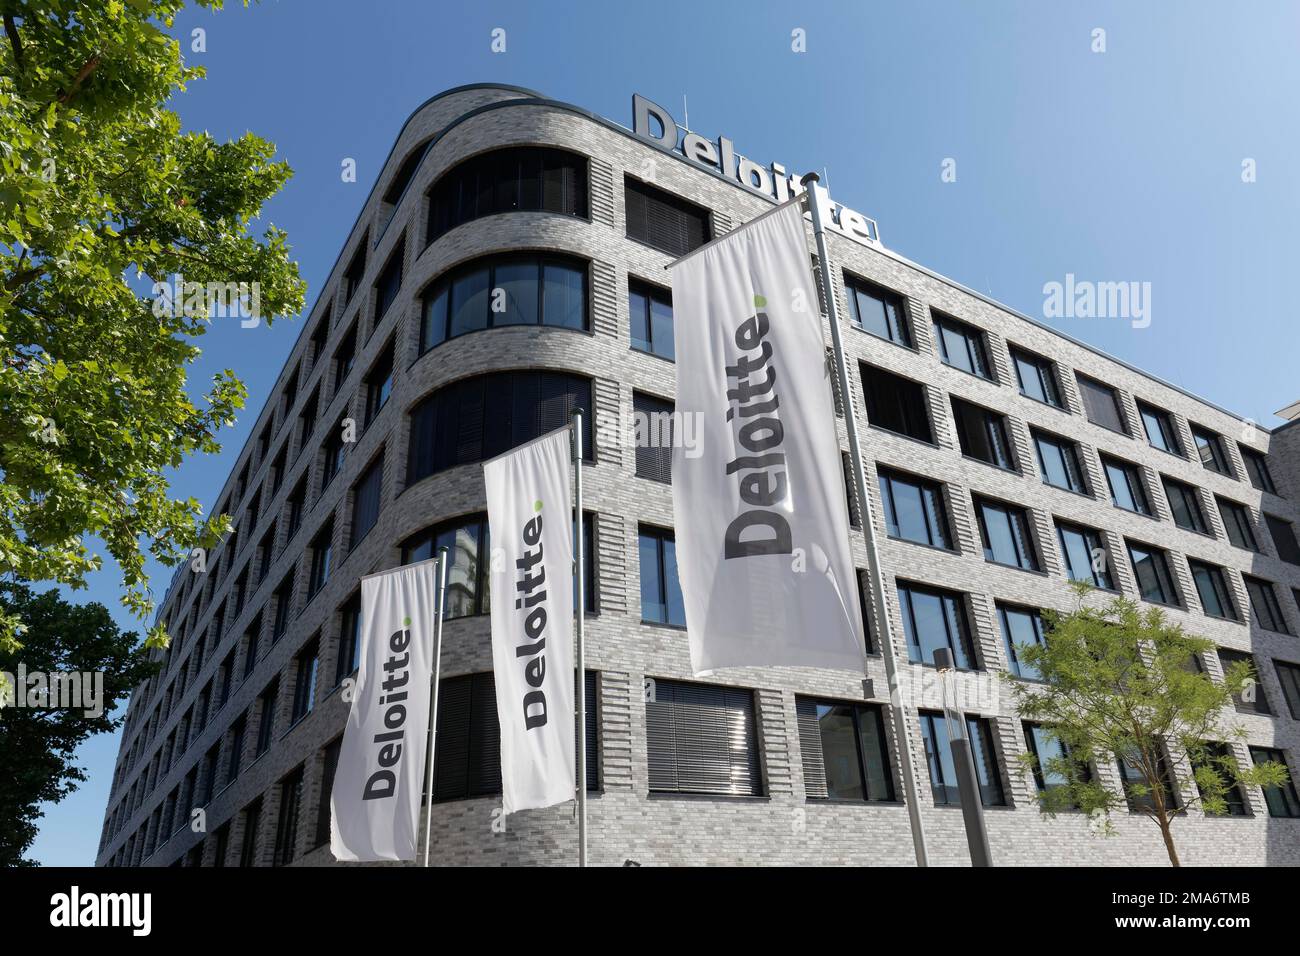 Deloitte Legal, Duesseldorf office, law firm, auditing firm, North Rhine-Westphalia, Germany Stock Photo